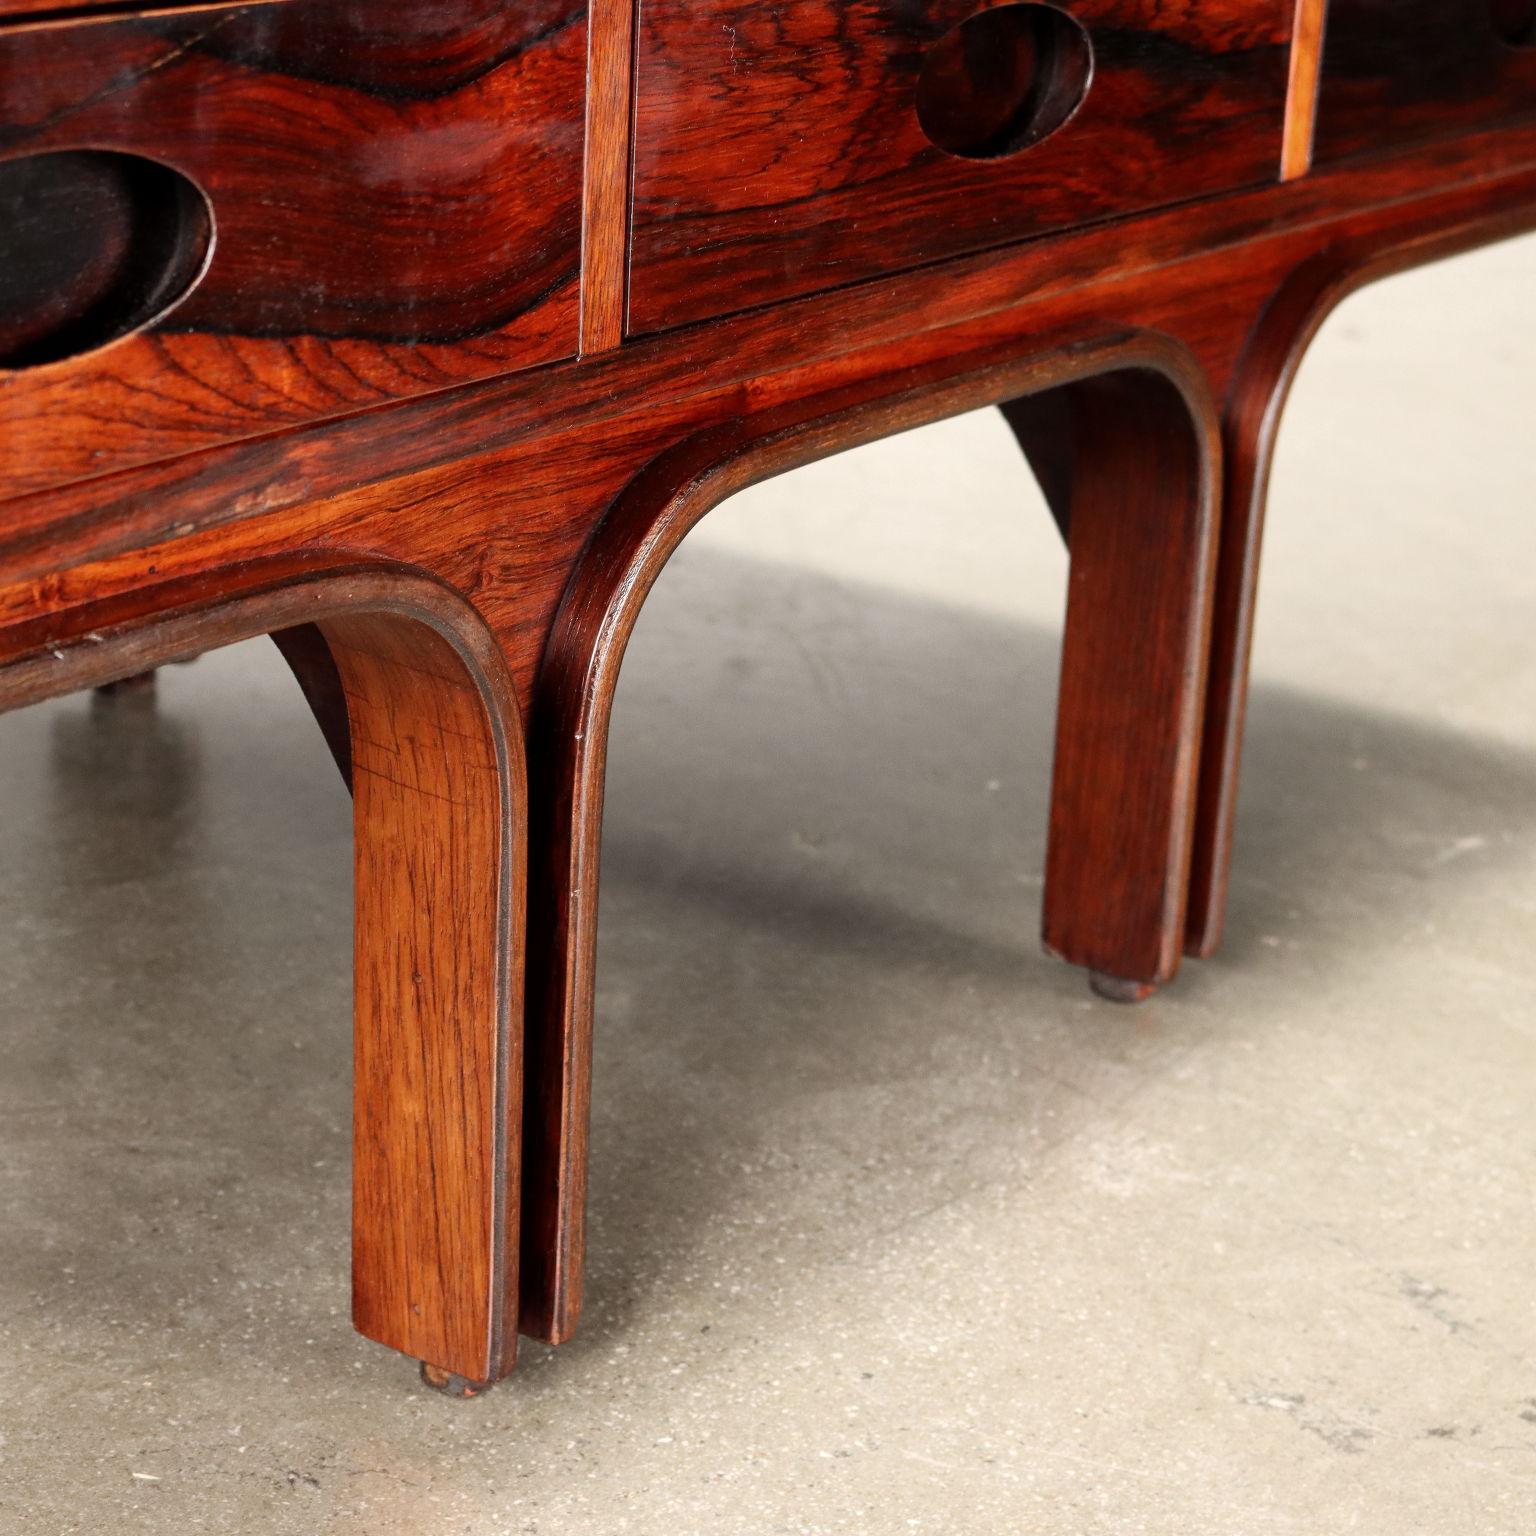 Italian Gianfranco Frattini Coffee Table with Three Drawers for Bernini, 1960s in wood For Sale